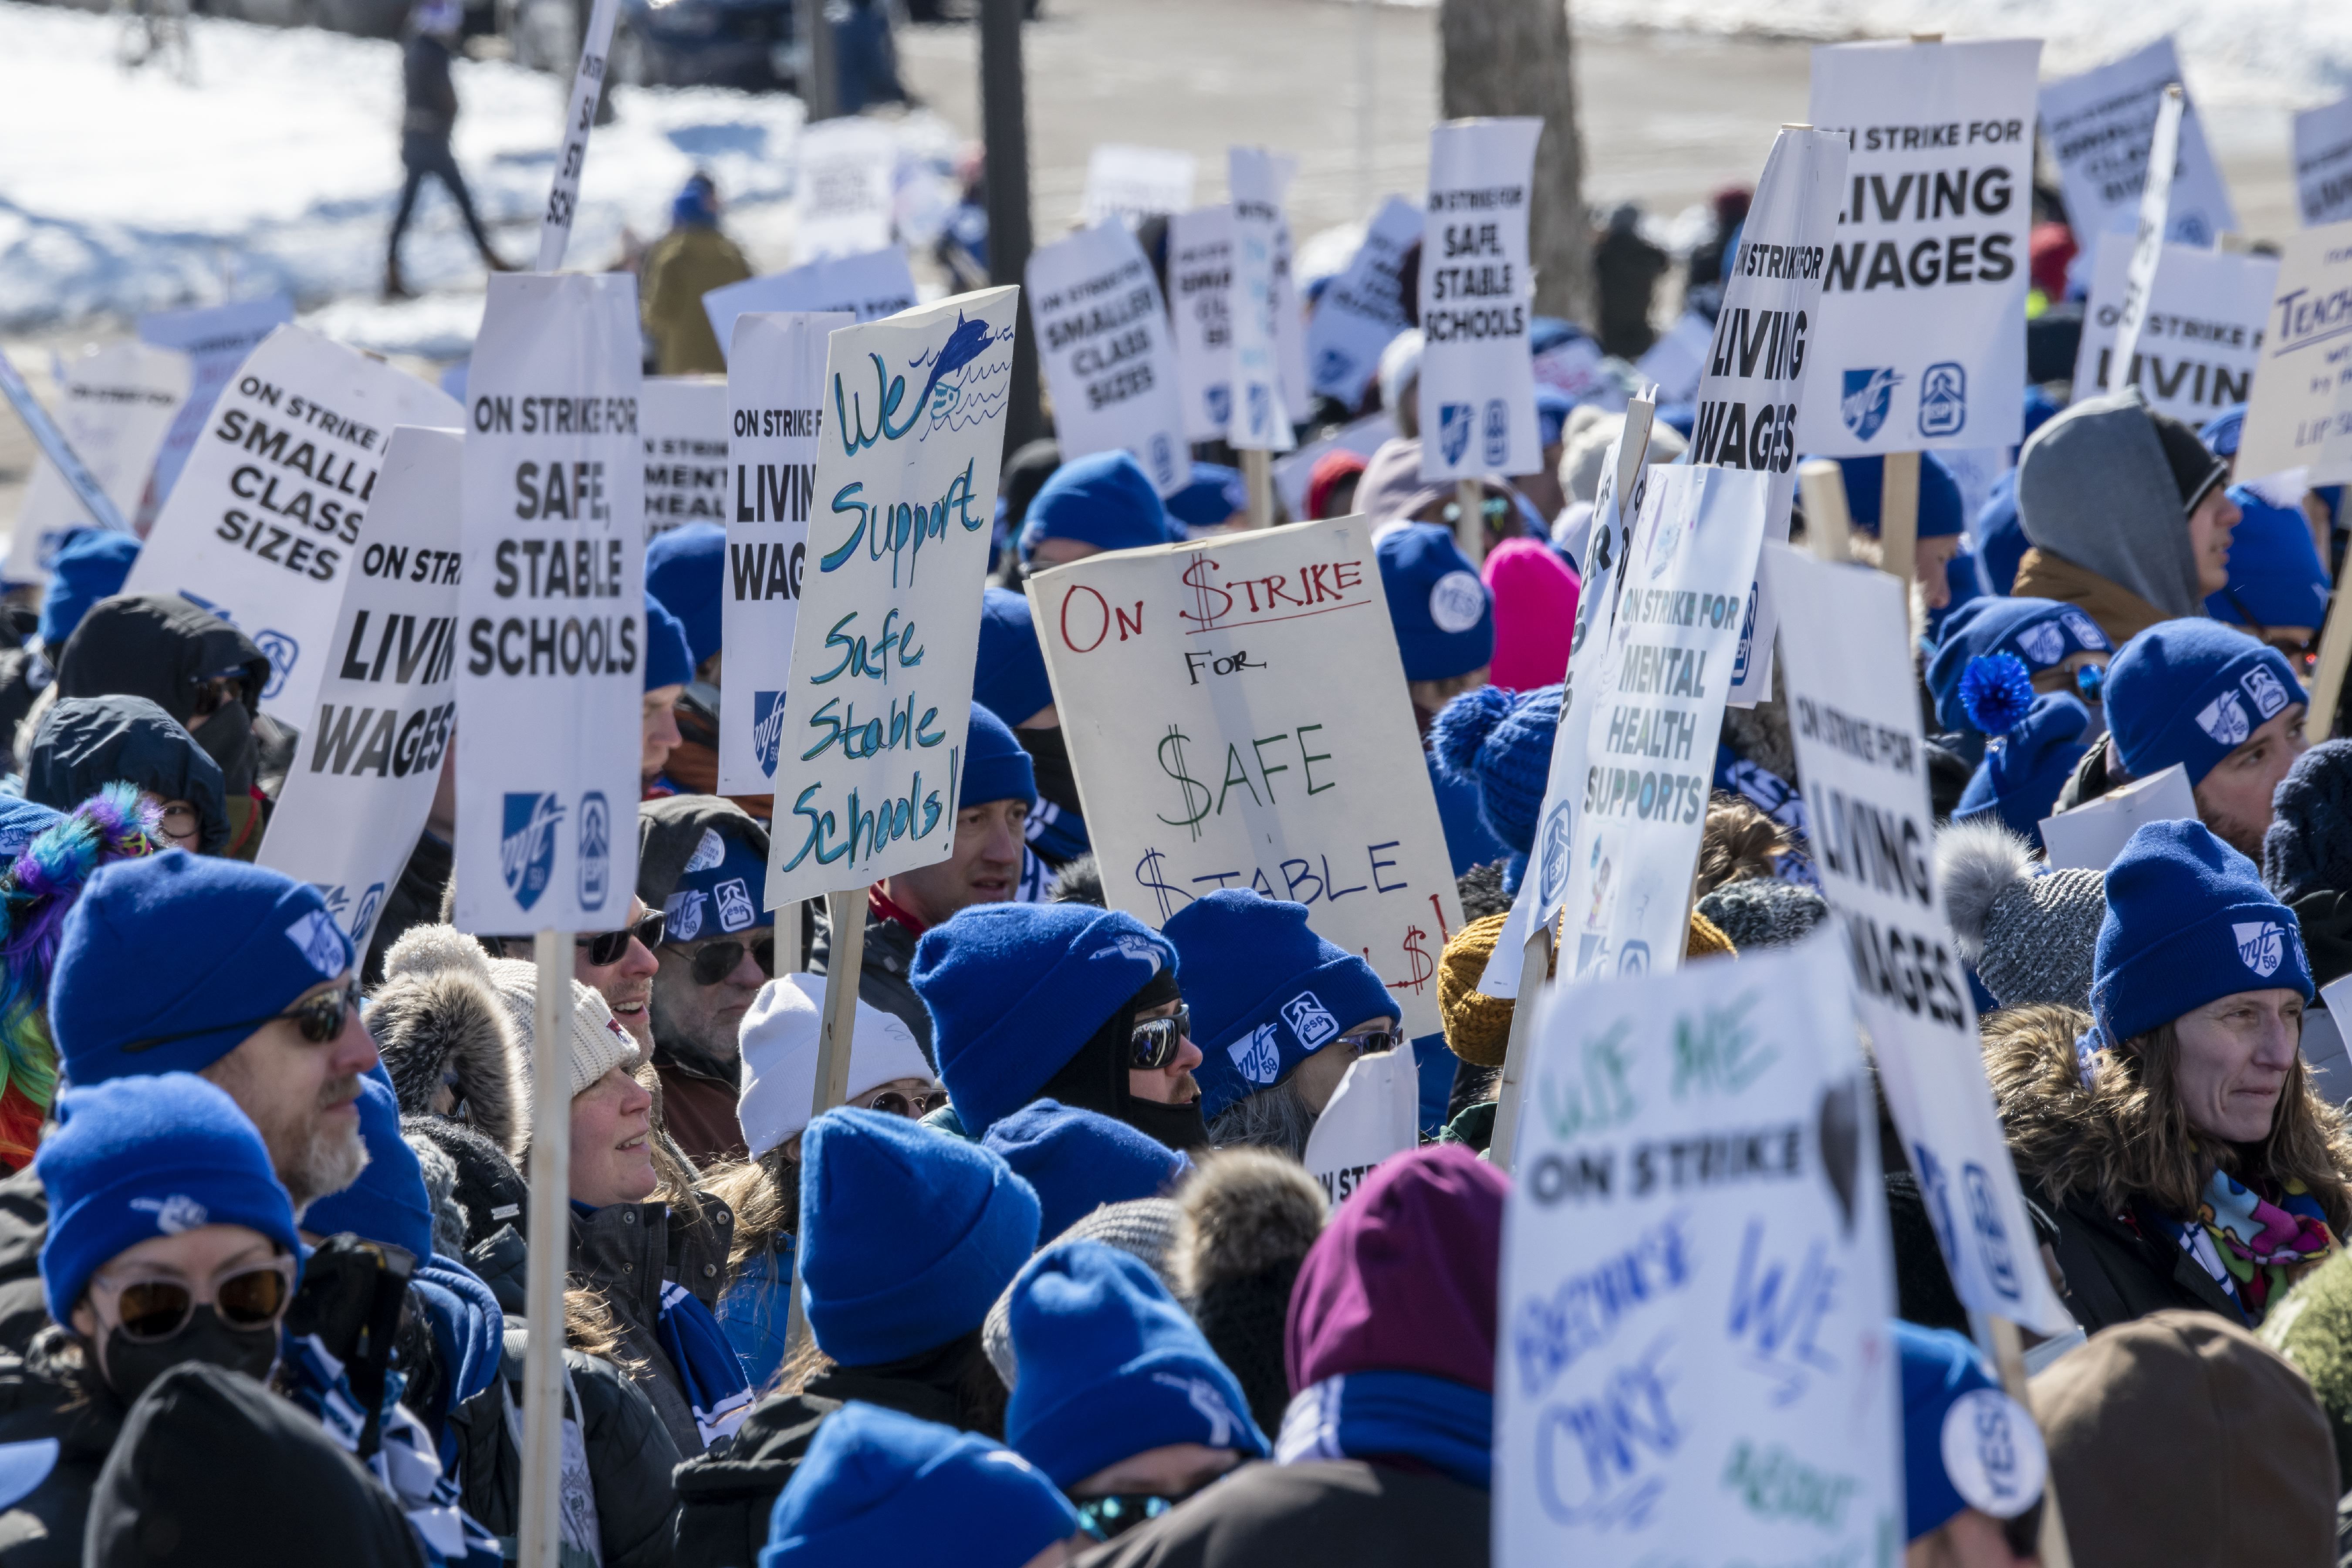 A group of people holding picket signs with slogans about supporting Minneapolis teachers.